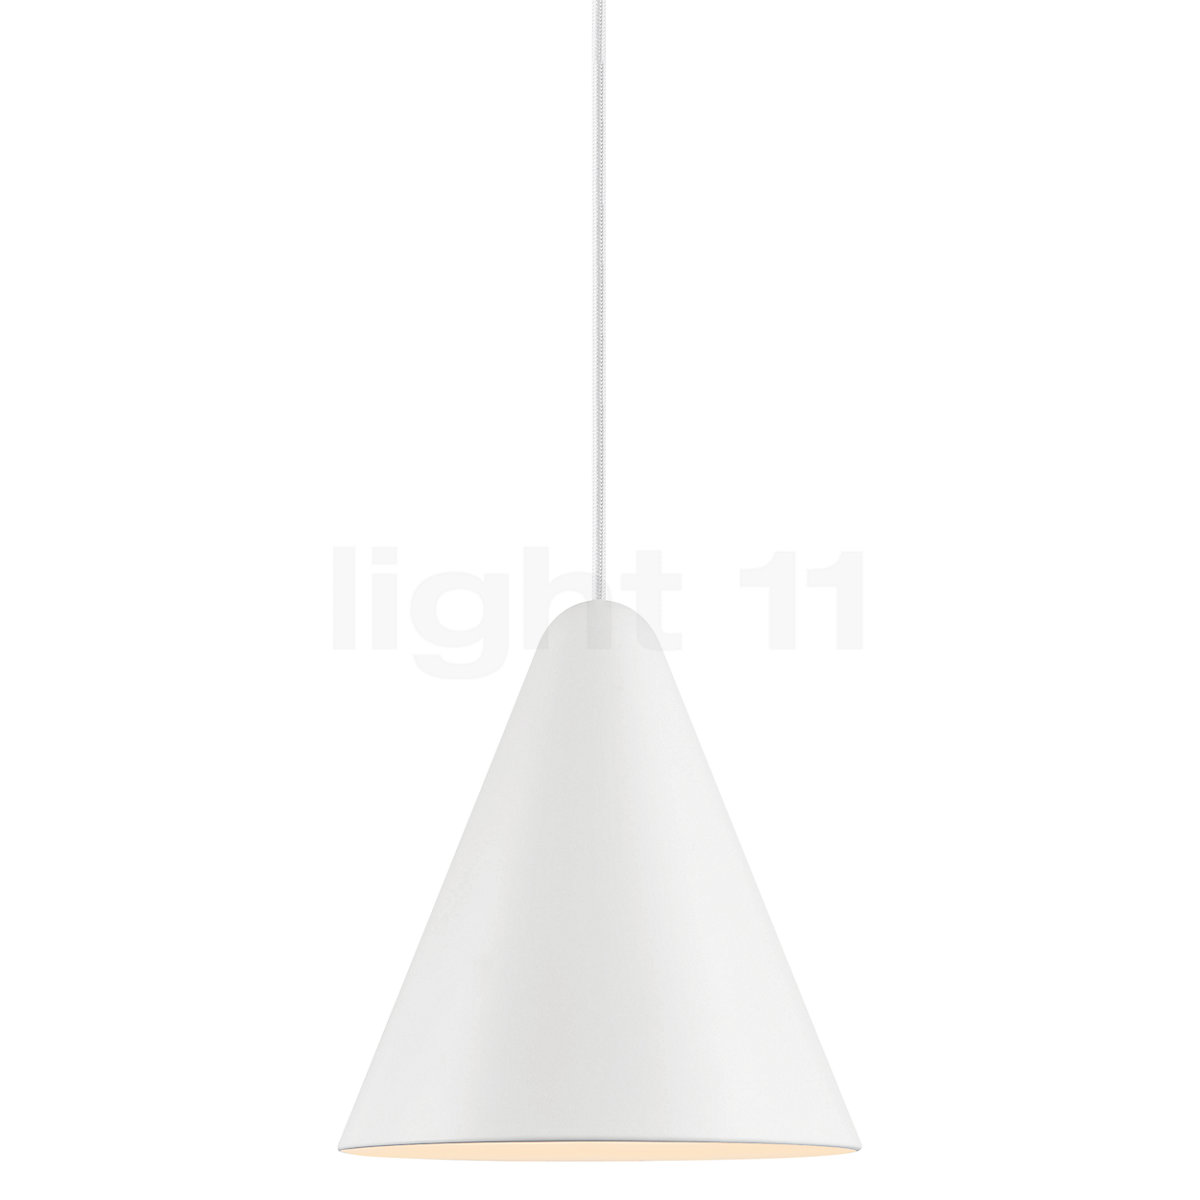 at Design for Light People the Buy Nono Pendant